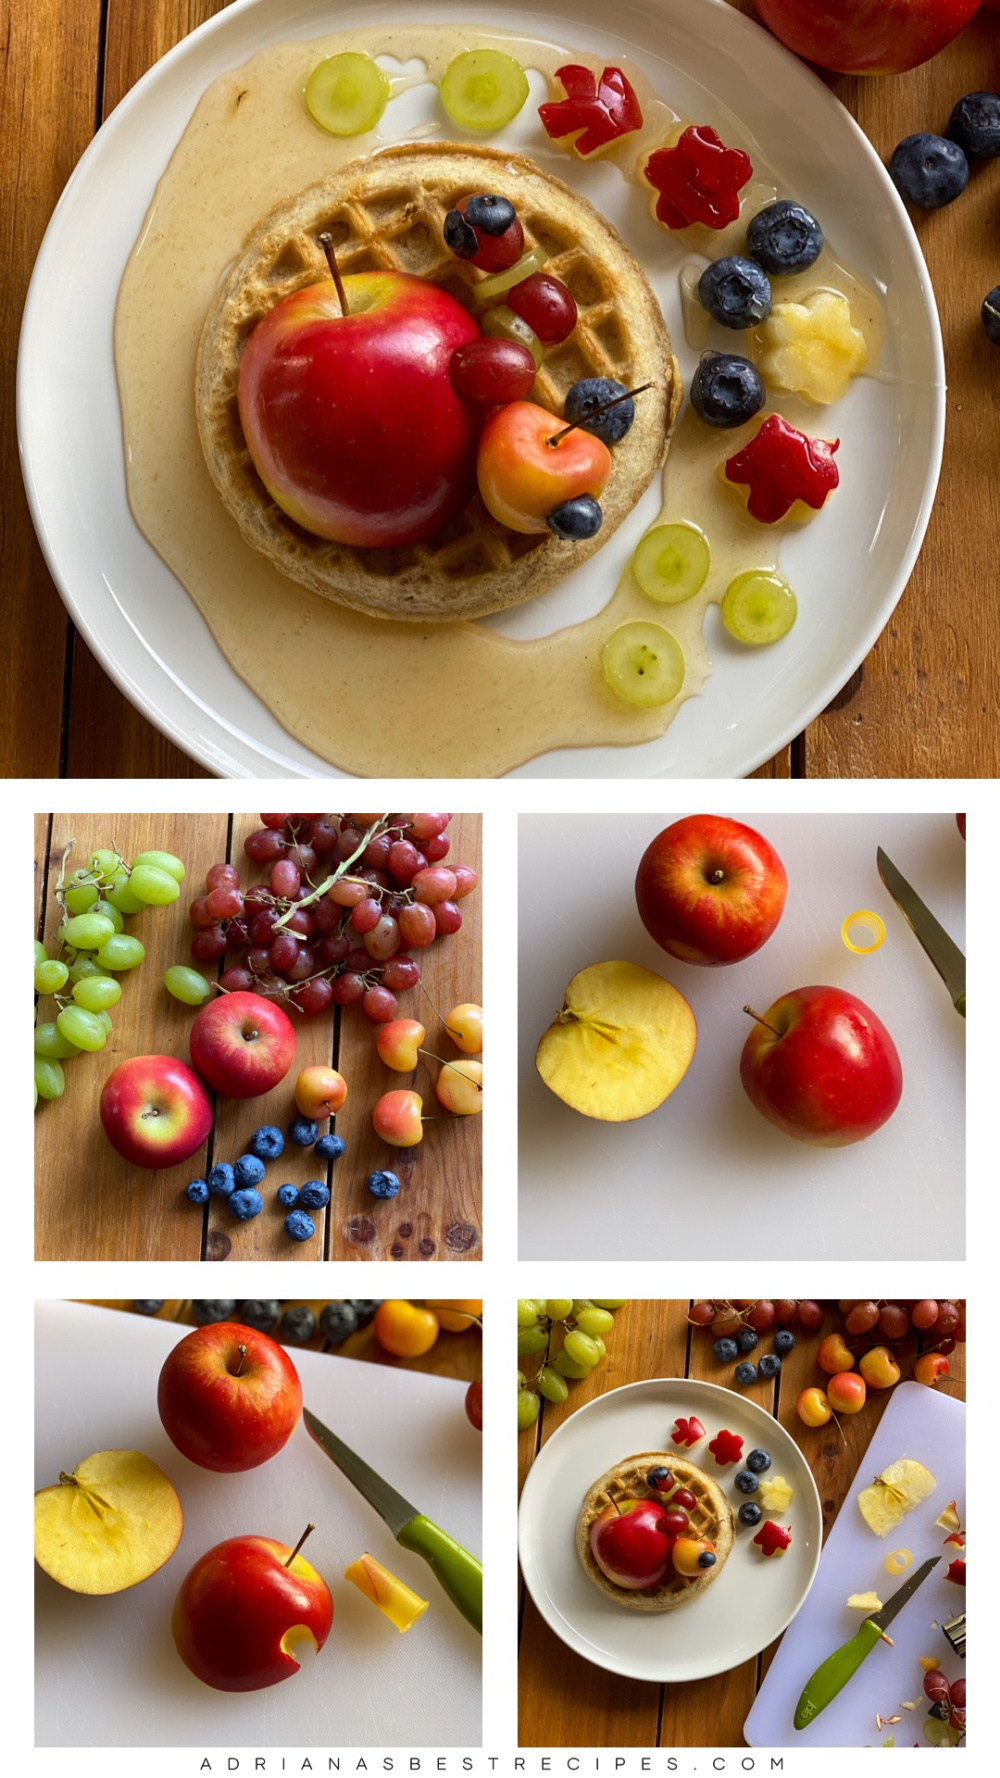 Step by step on how to make the fallen apples waffle